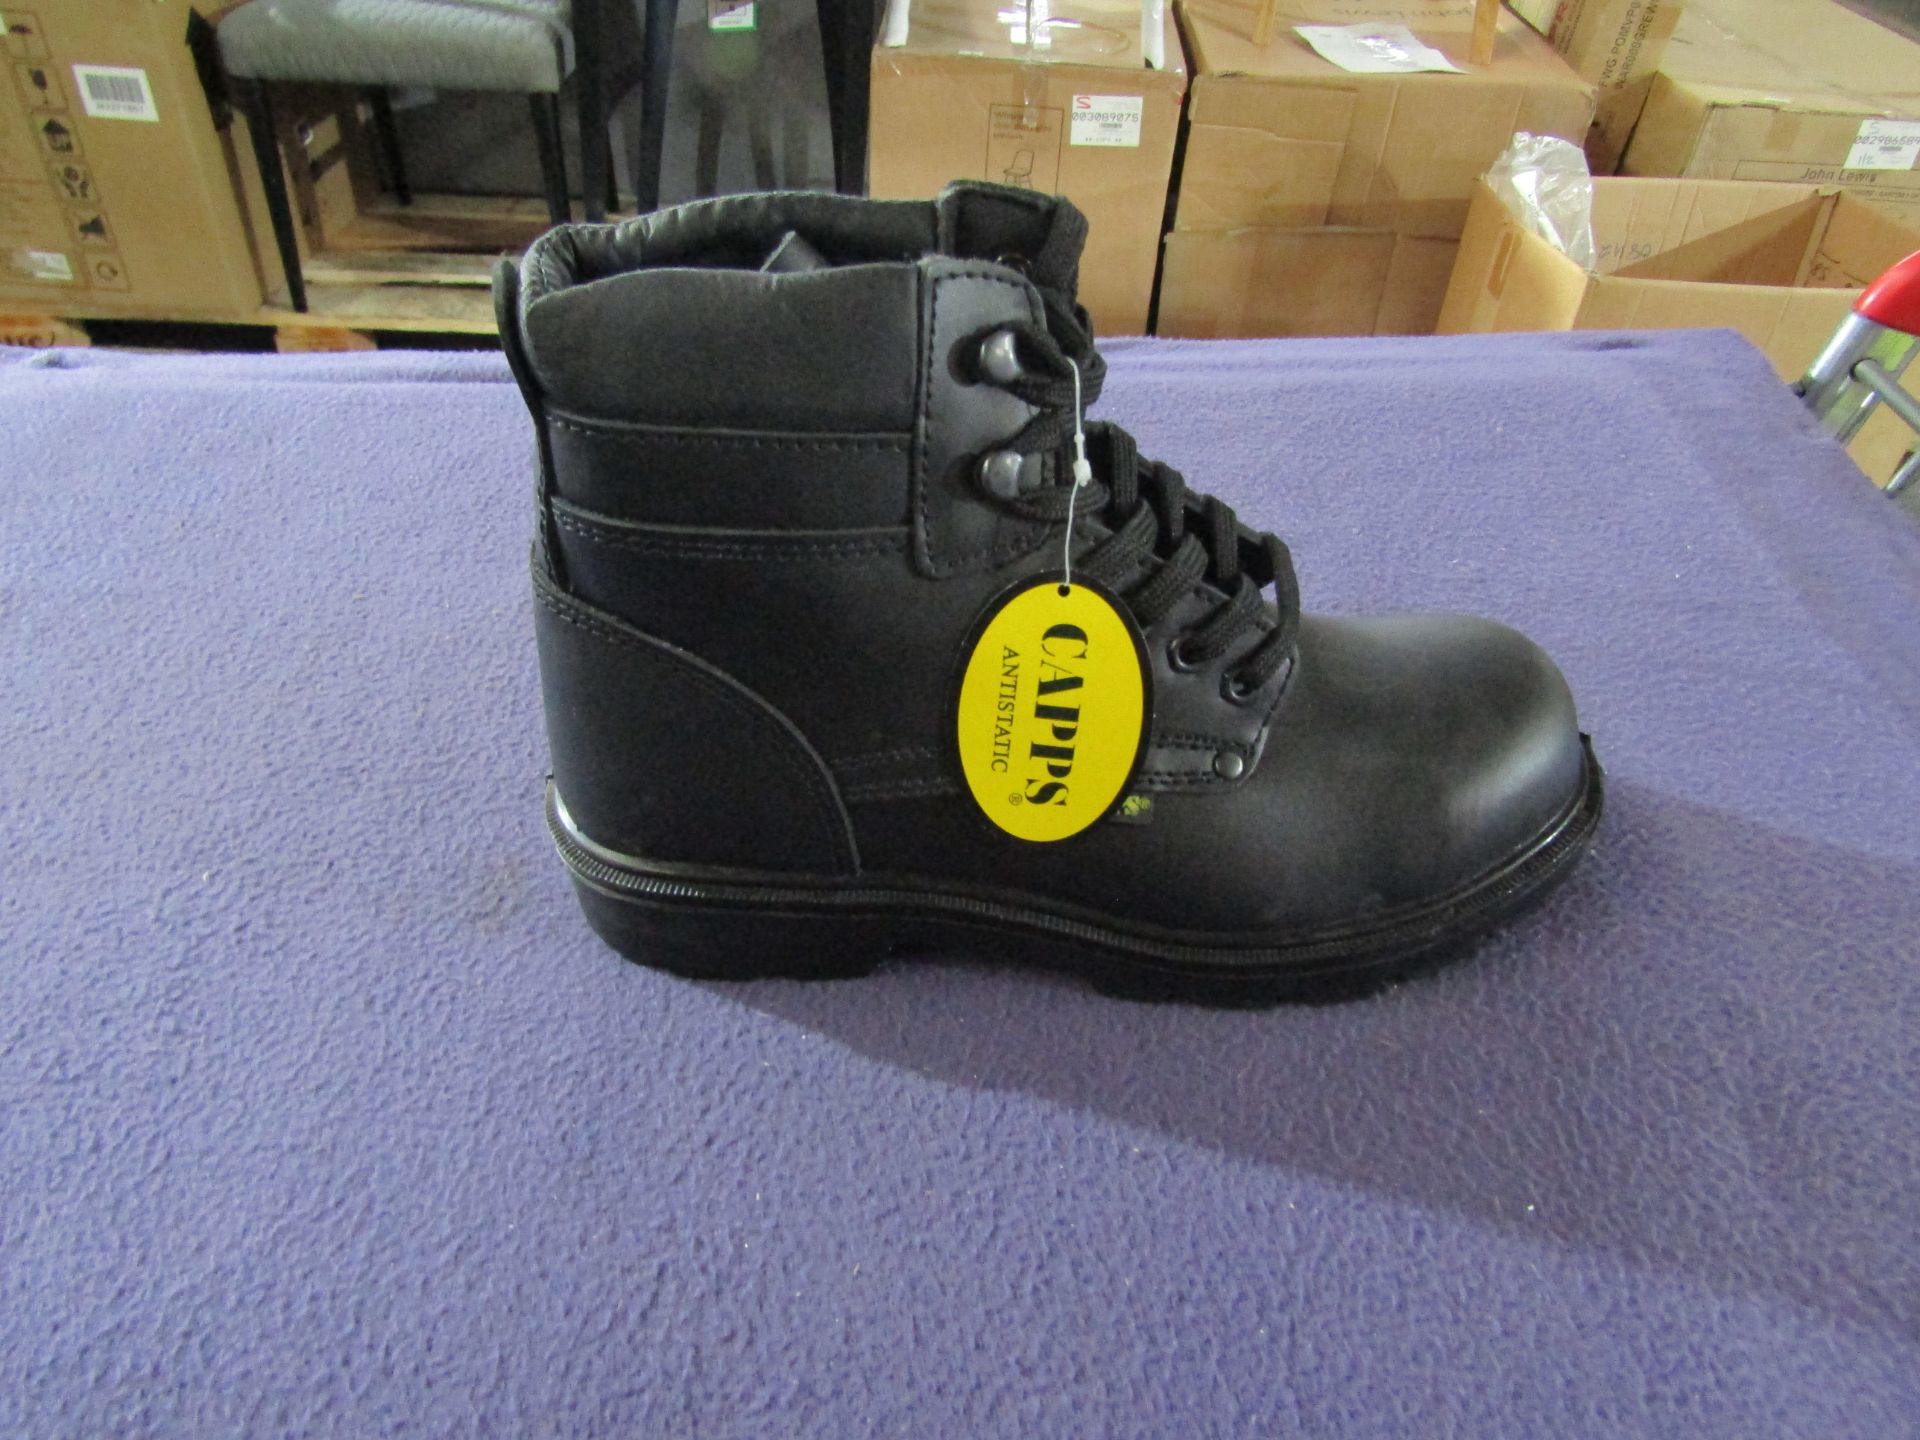 CAPPS - Black Boots With Steel-toe Cap - Size 10 - Unused & Boxed.